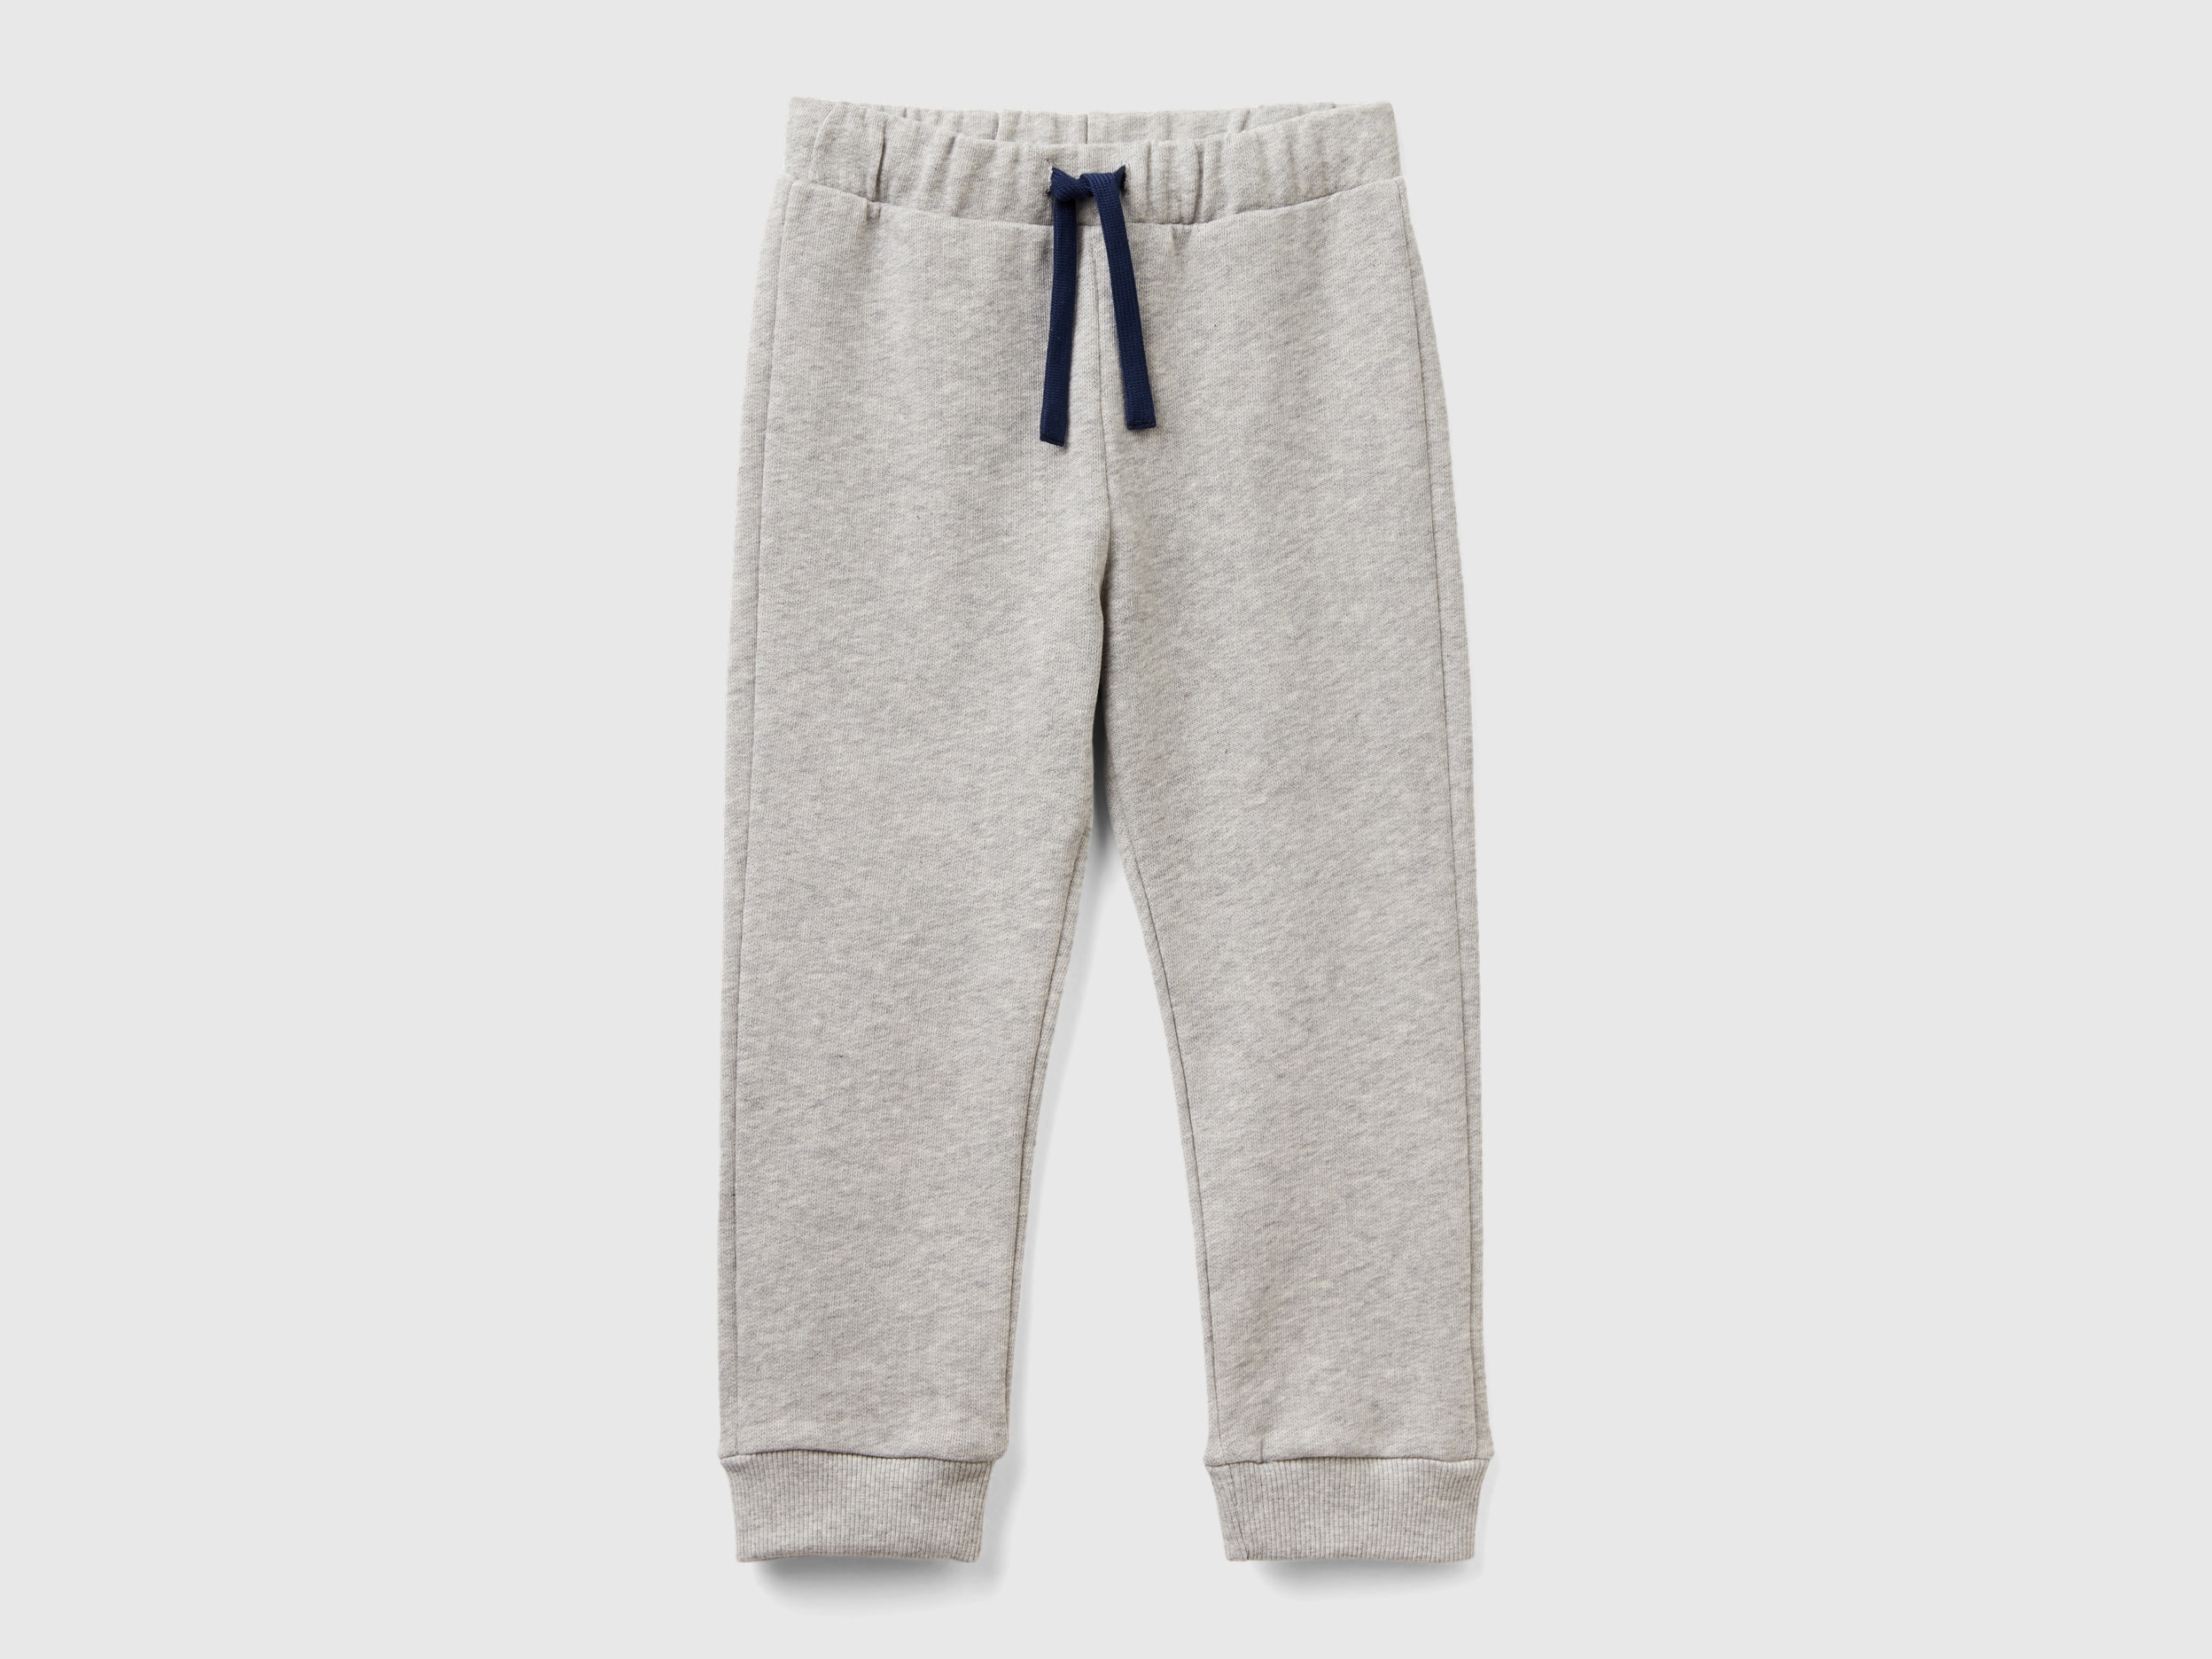 Image of Benetton, Sweatpants With Pocket, size 90, Light Gray, Kids